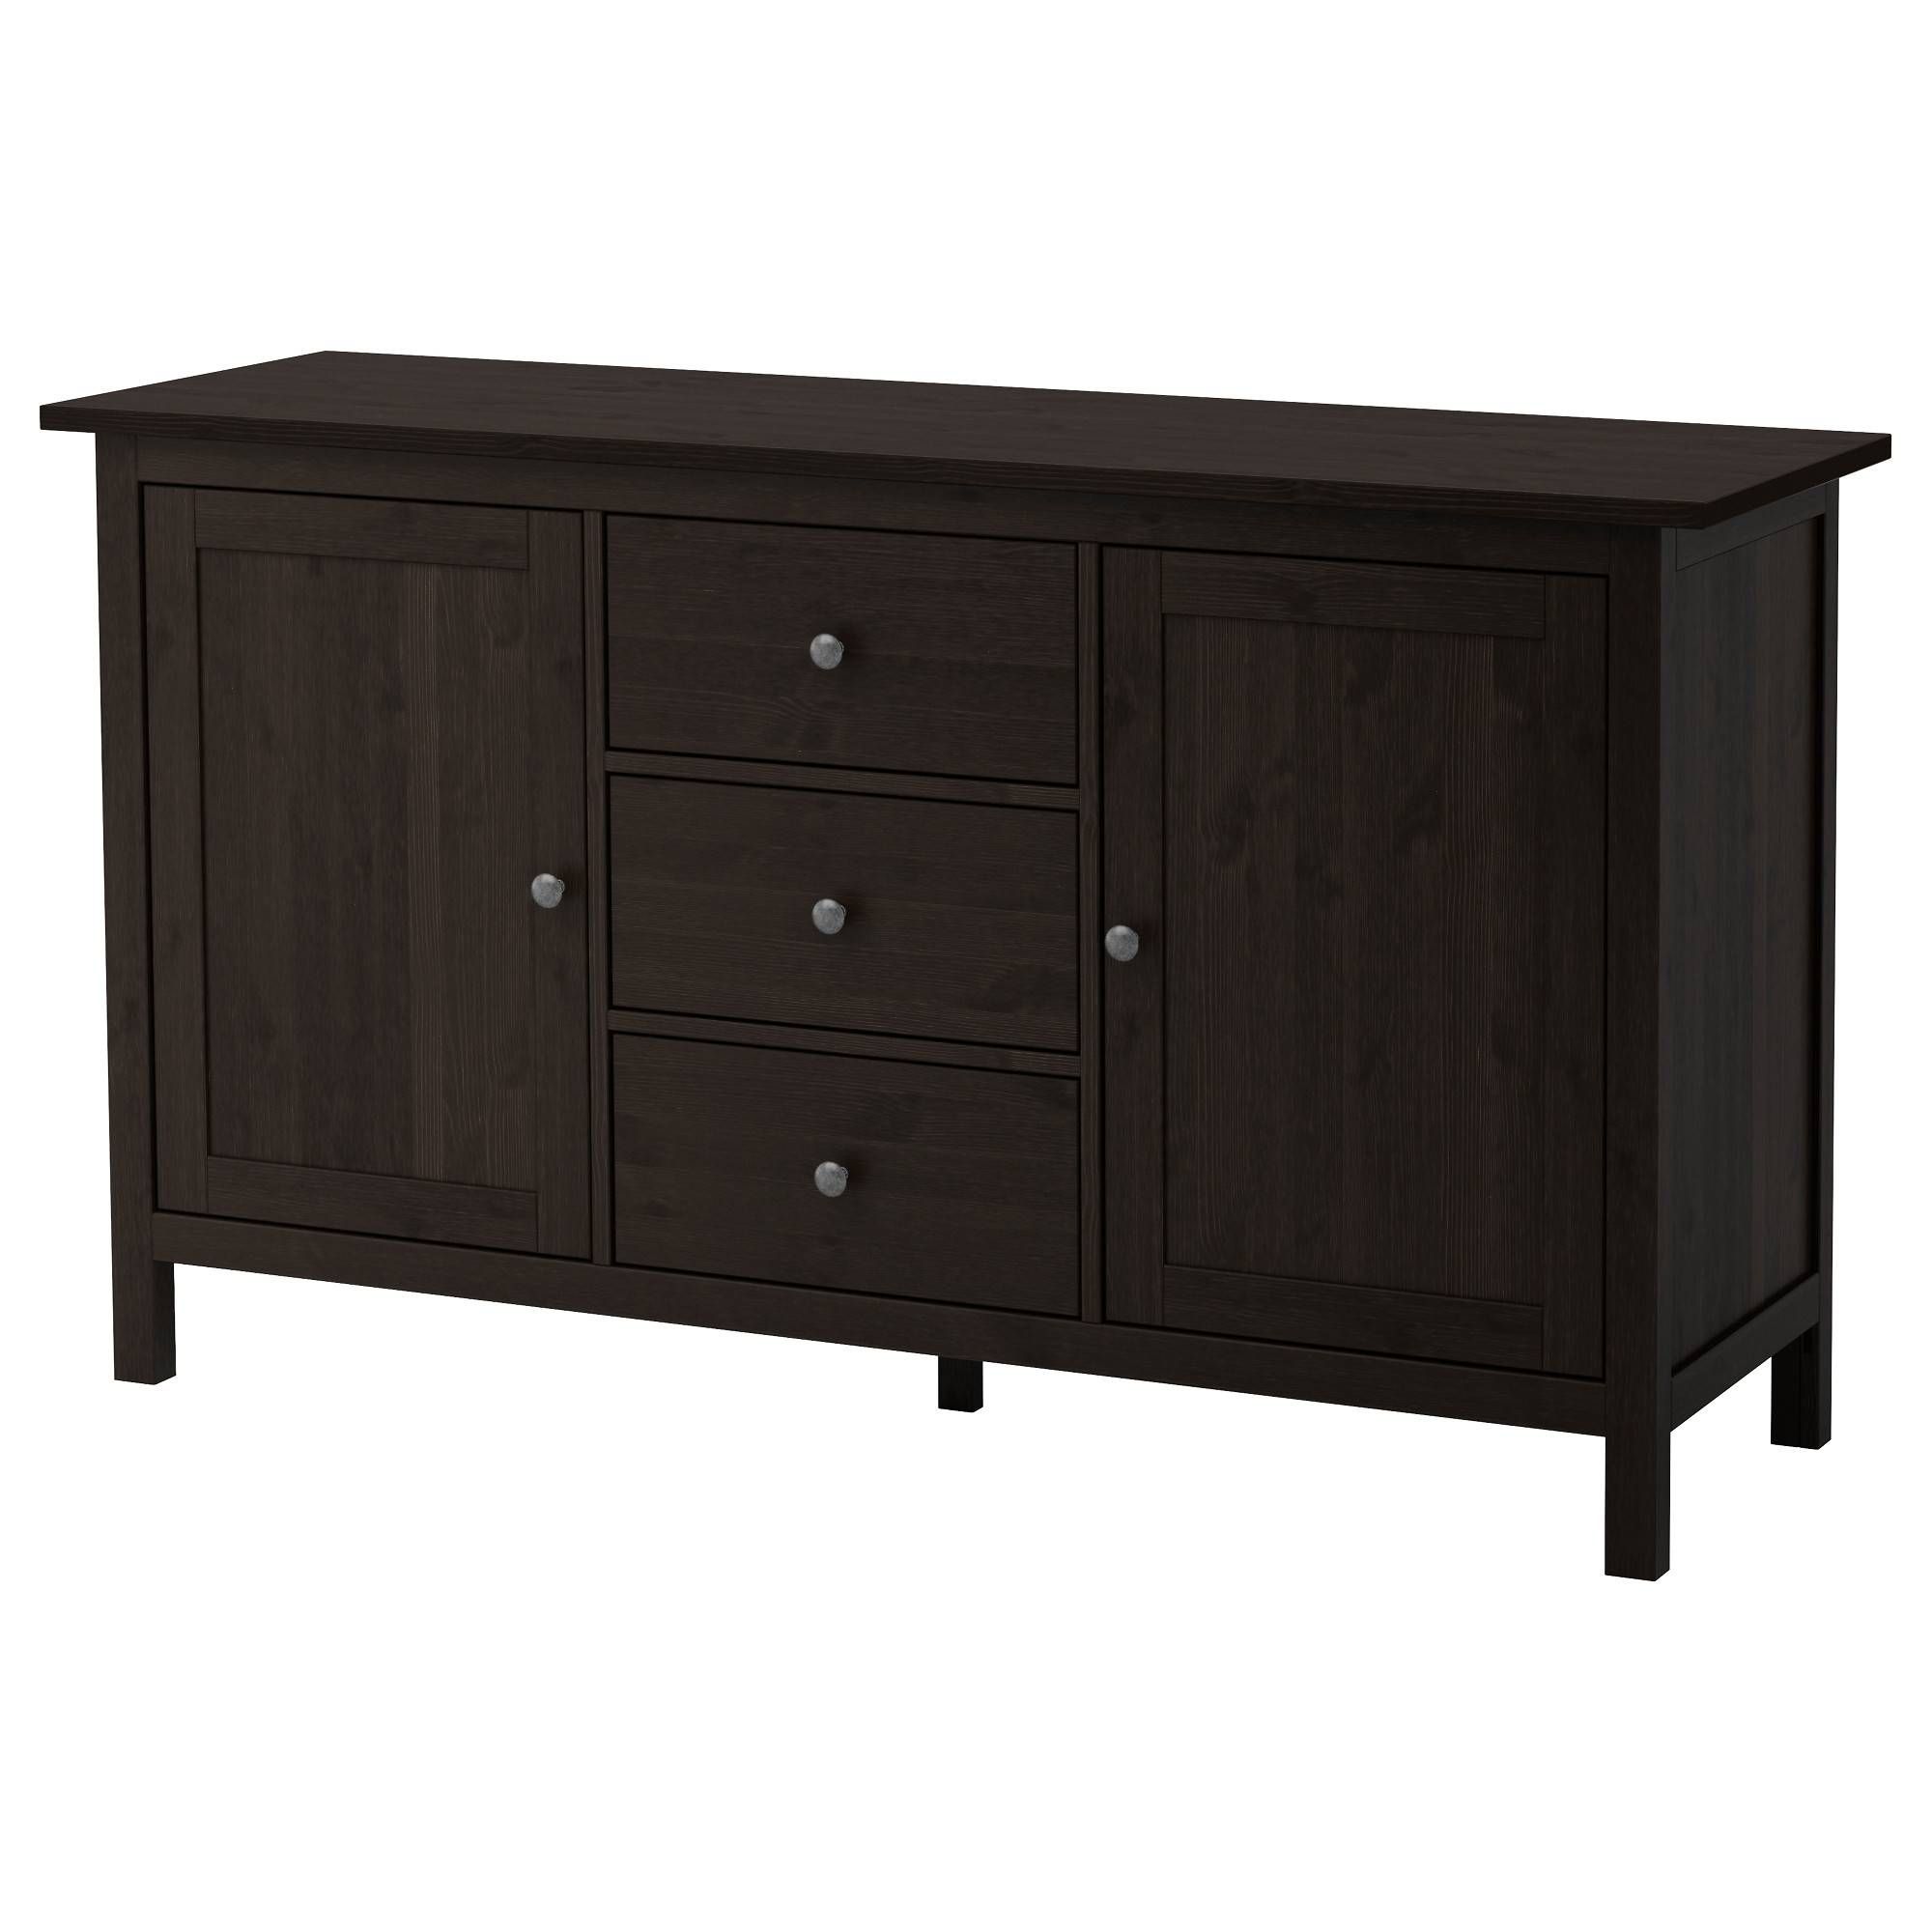 Hemnes Sideboard – Black Brown – Ikea For Sideboards And Buffets (View 1 of 15)